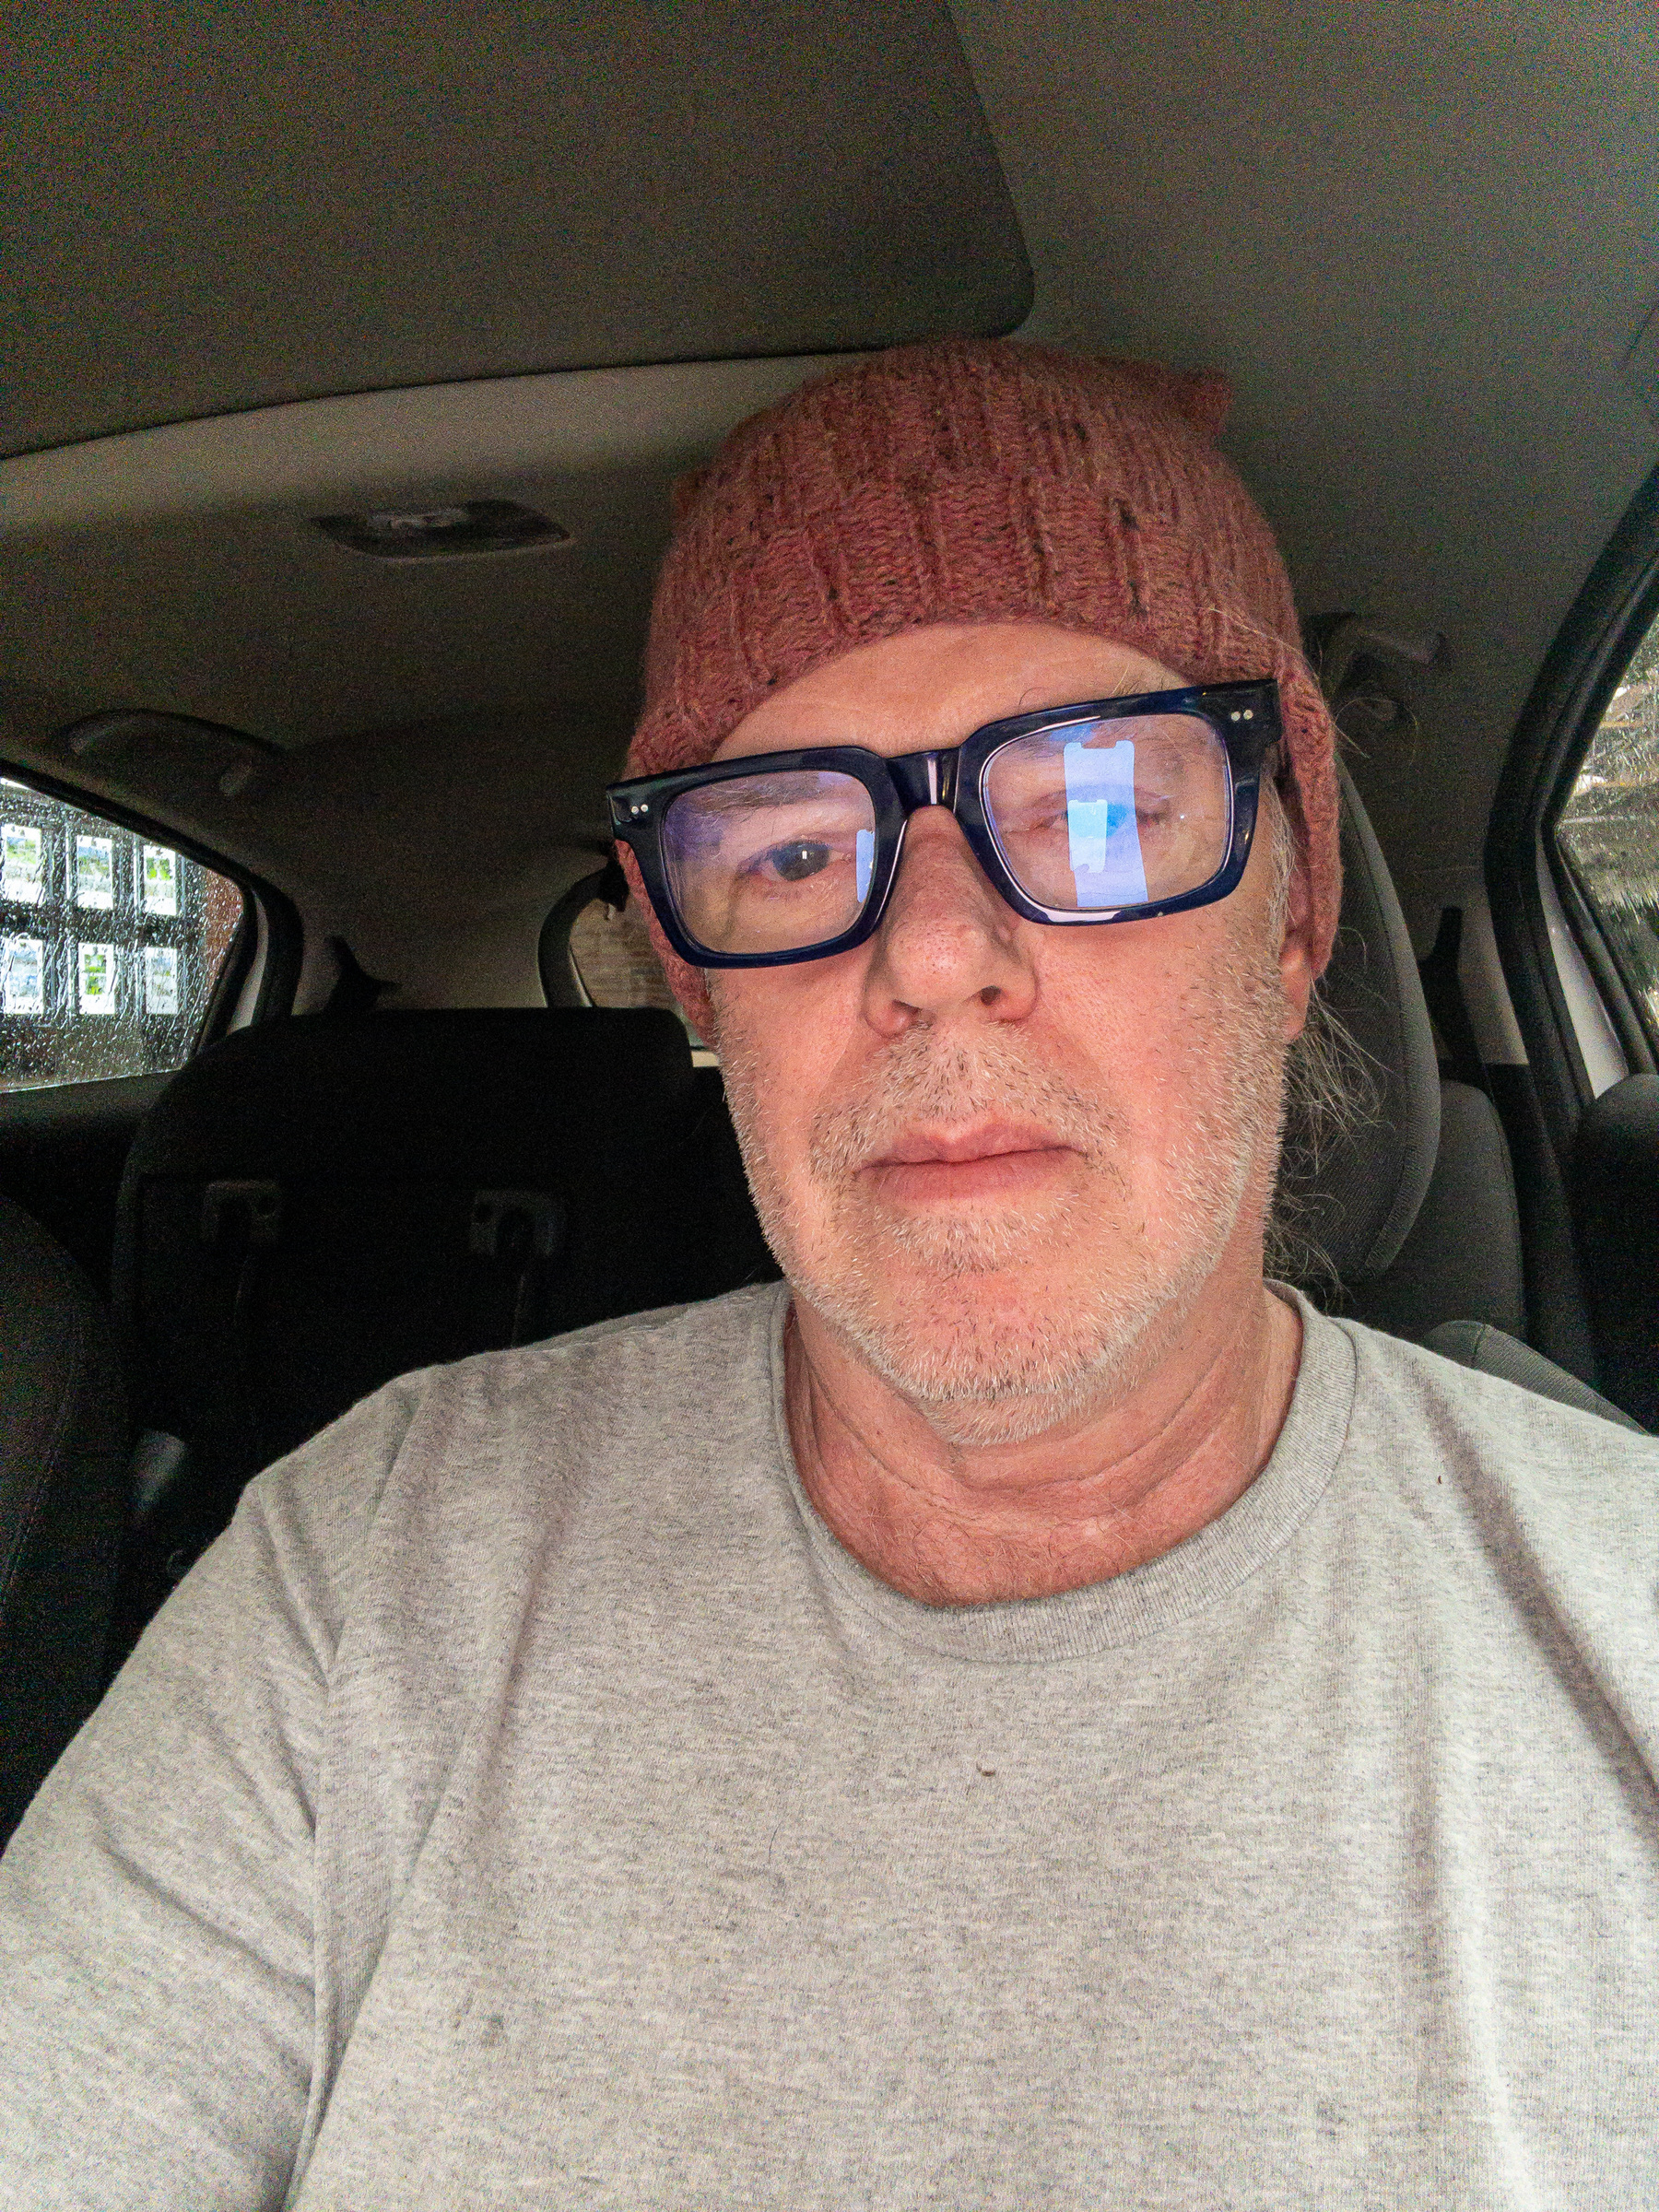 Selfie, man in a car with gray t-shirt, beard stubble, heavy framed blue glasses, pink knit cap.